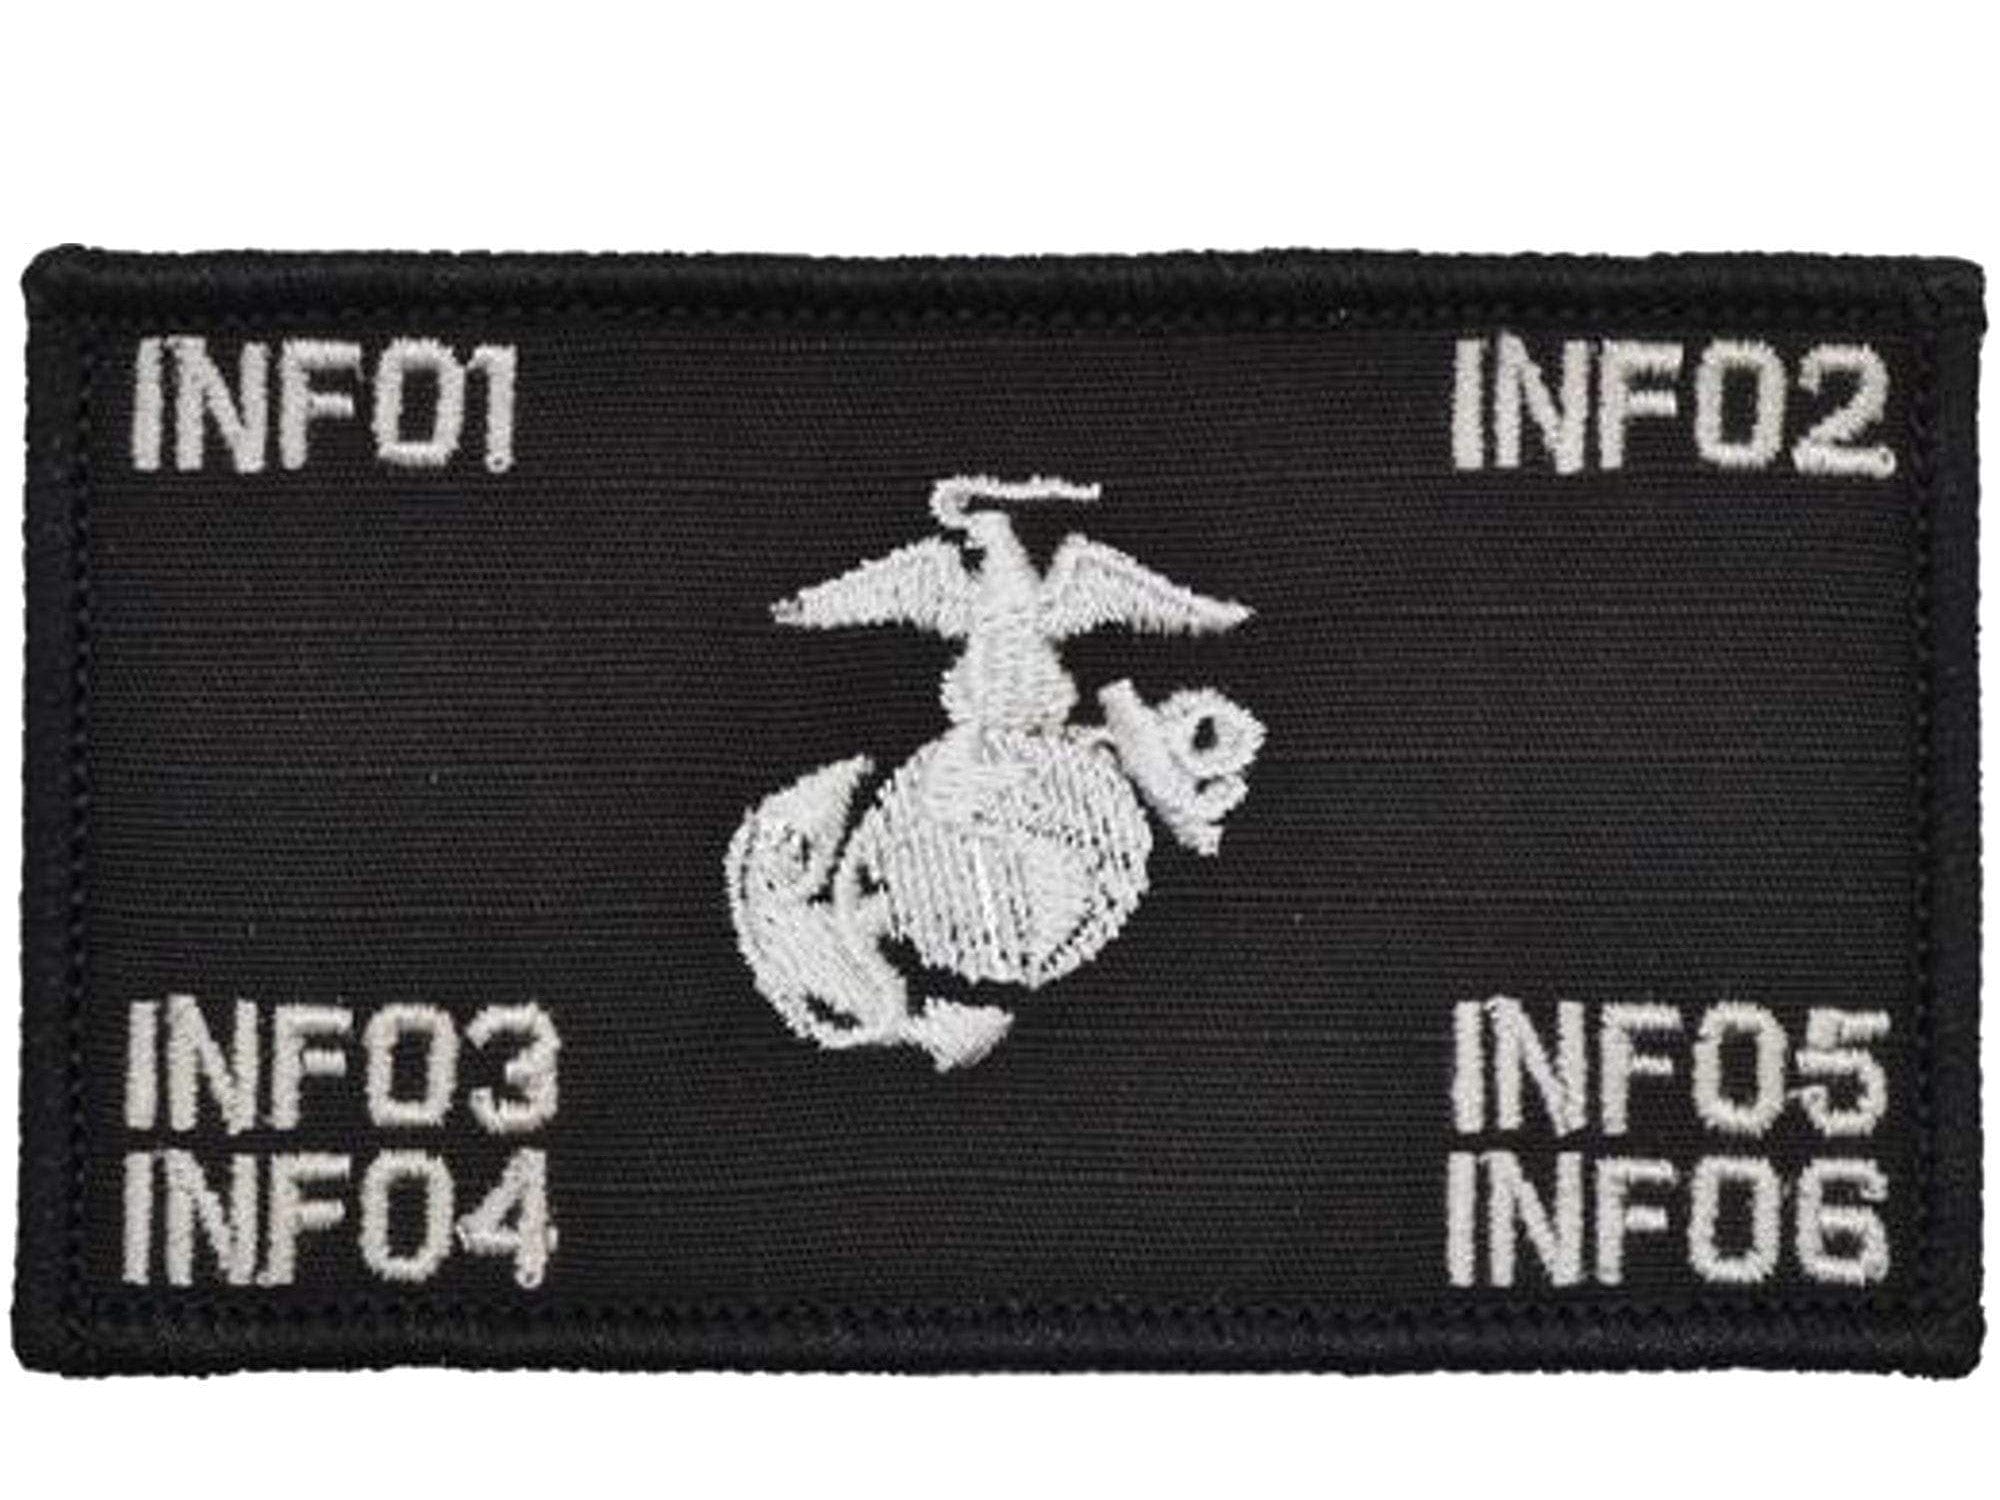 USMC Plate Carrier Flak Patch - Eagle Globe and Anchor Graphic (Filled  Globe)